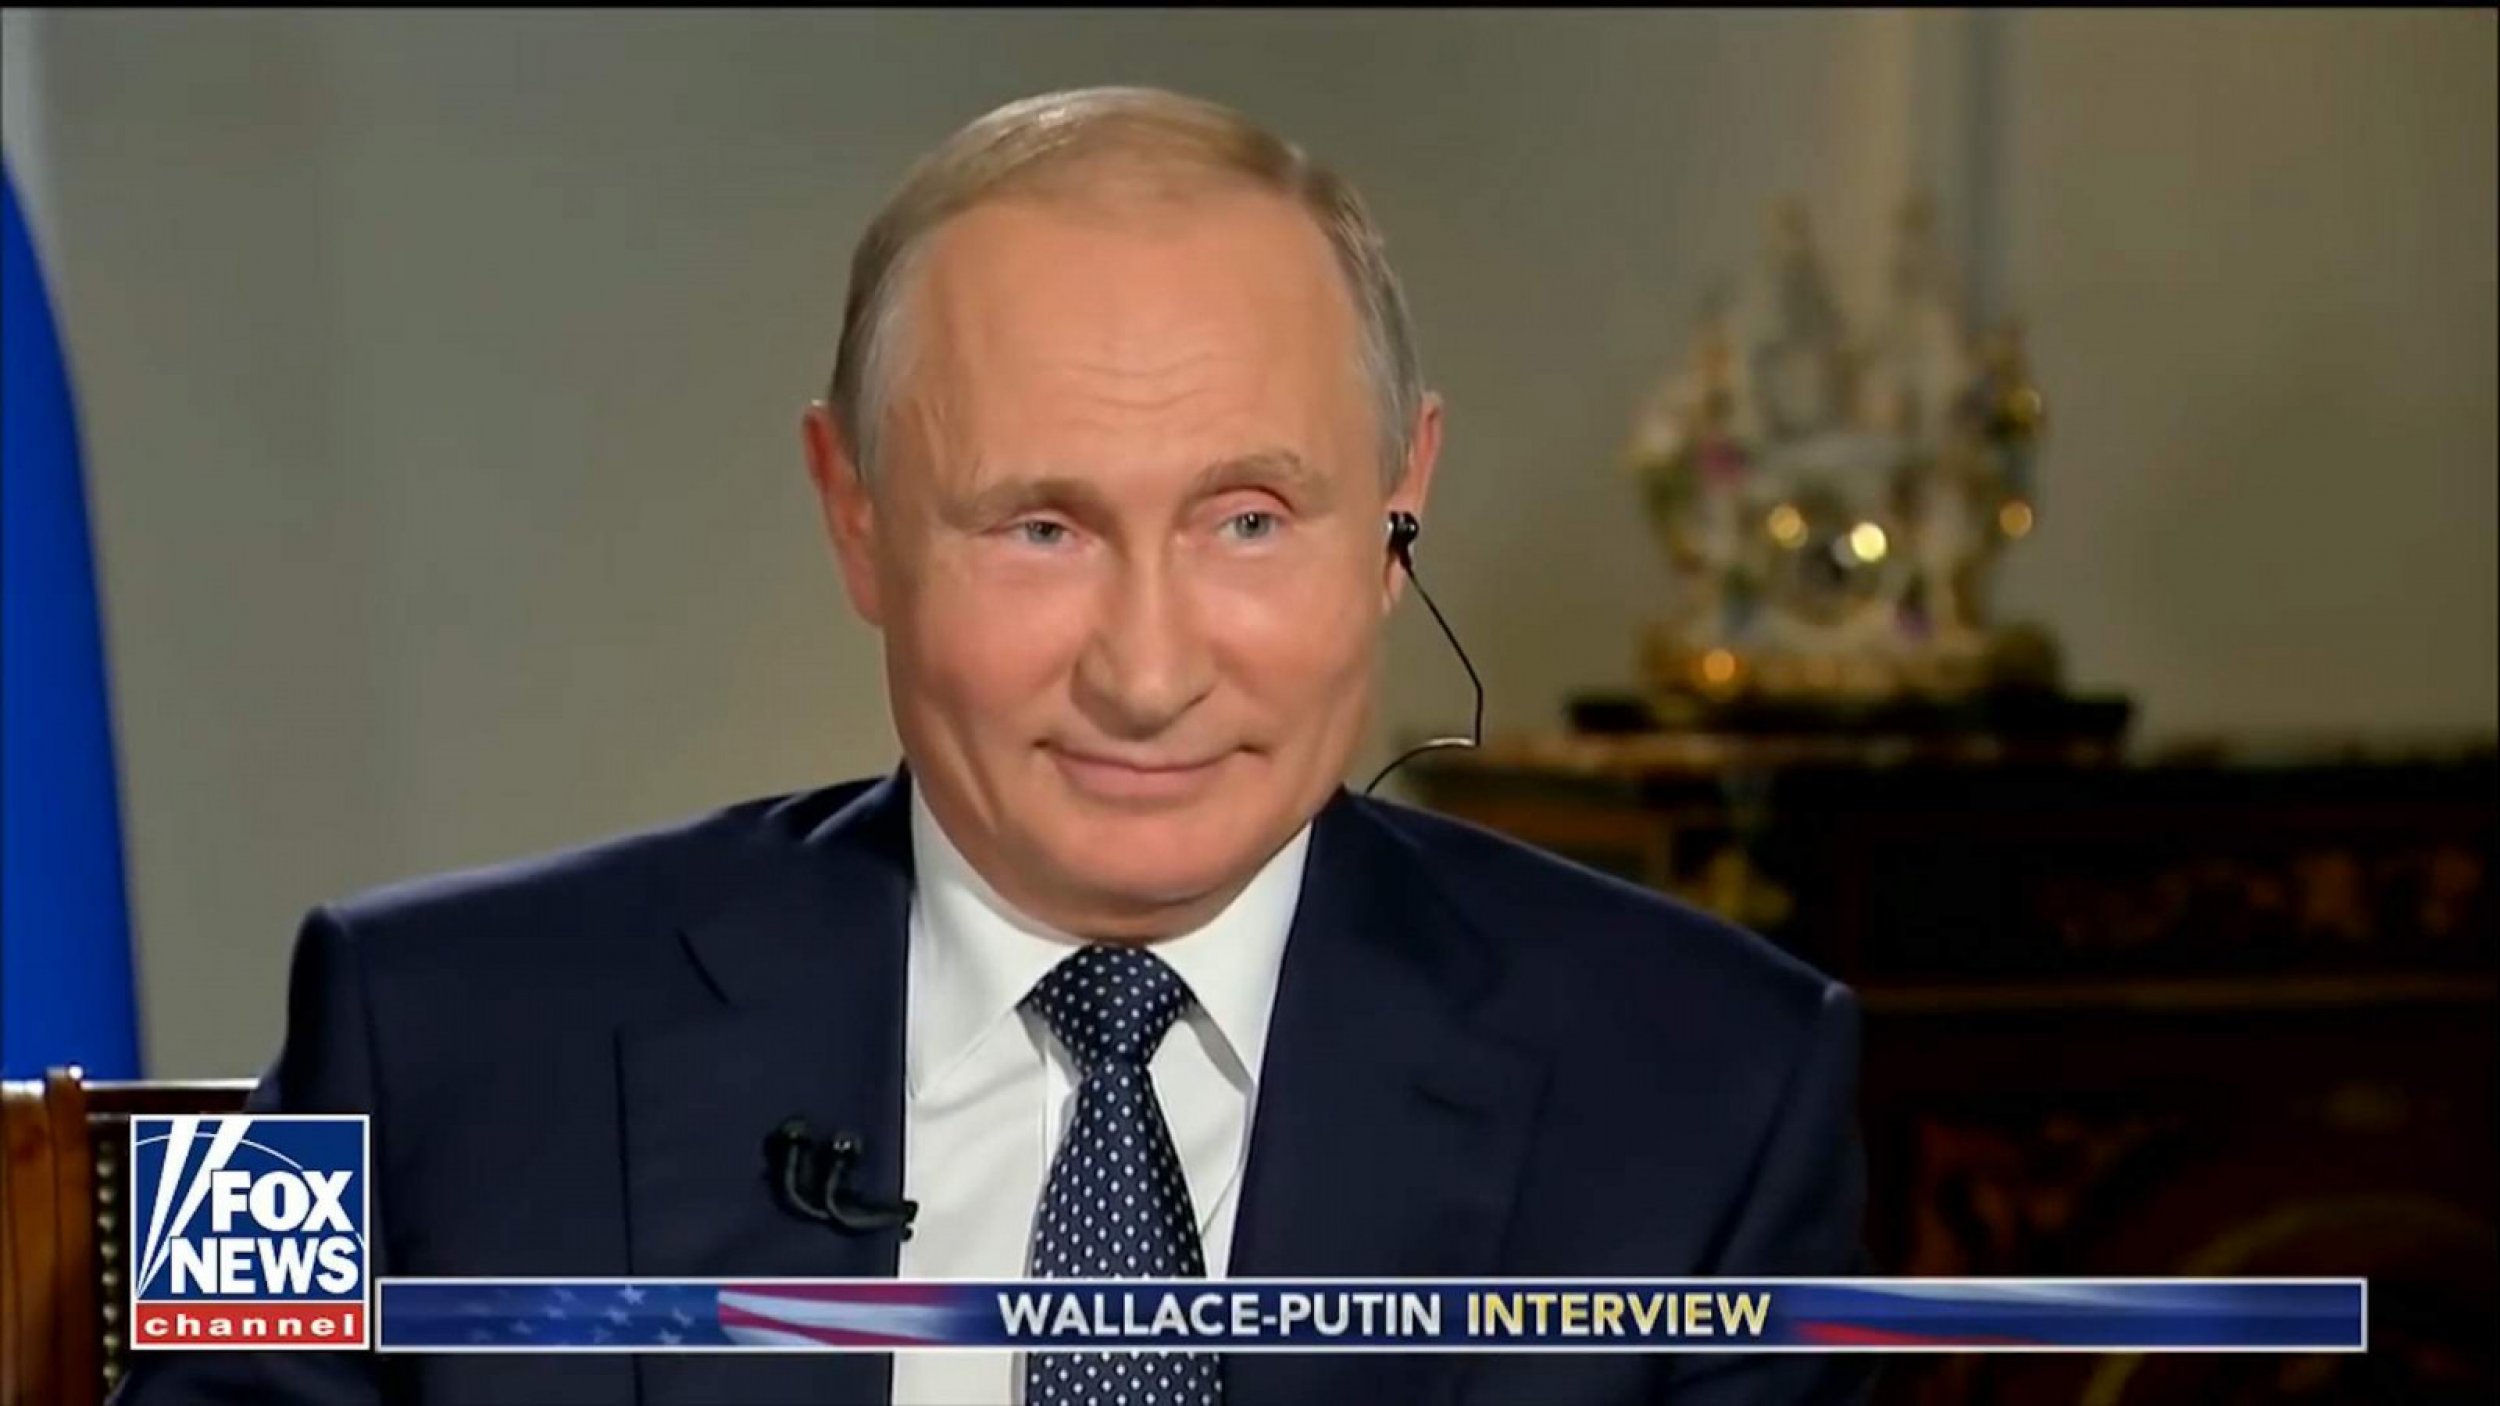 Putin Refuses To Hold Indictment Document During Fox Interview